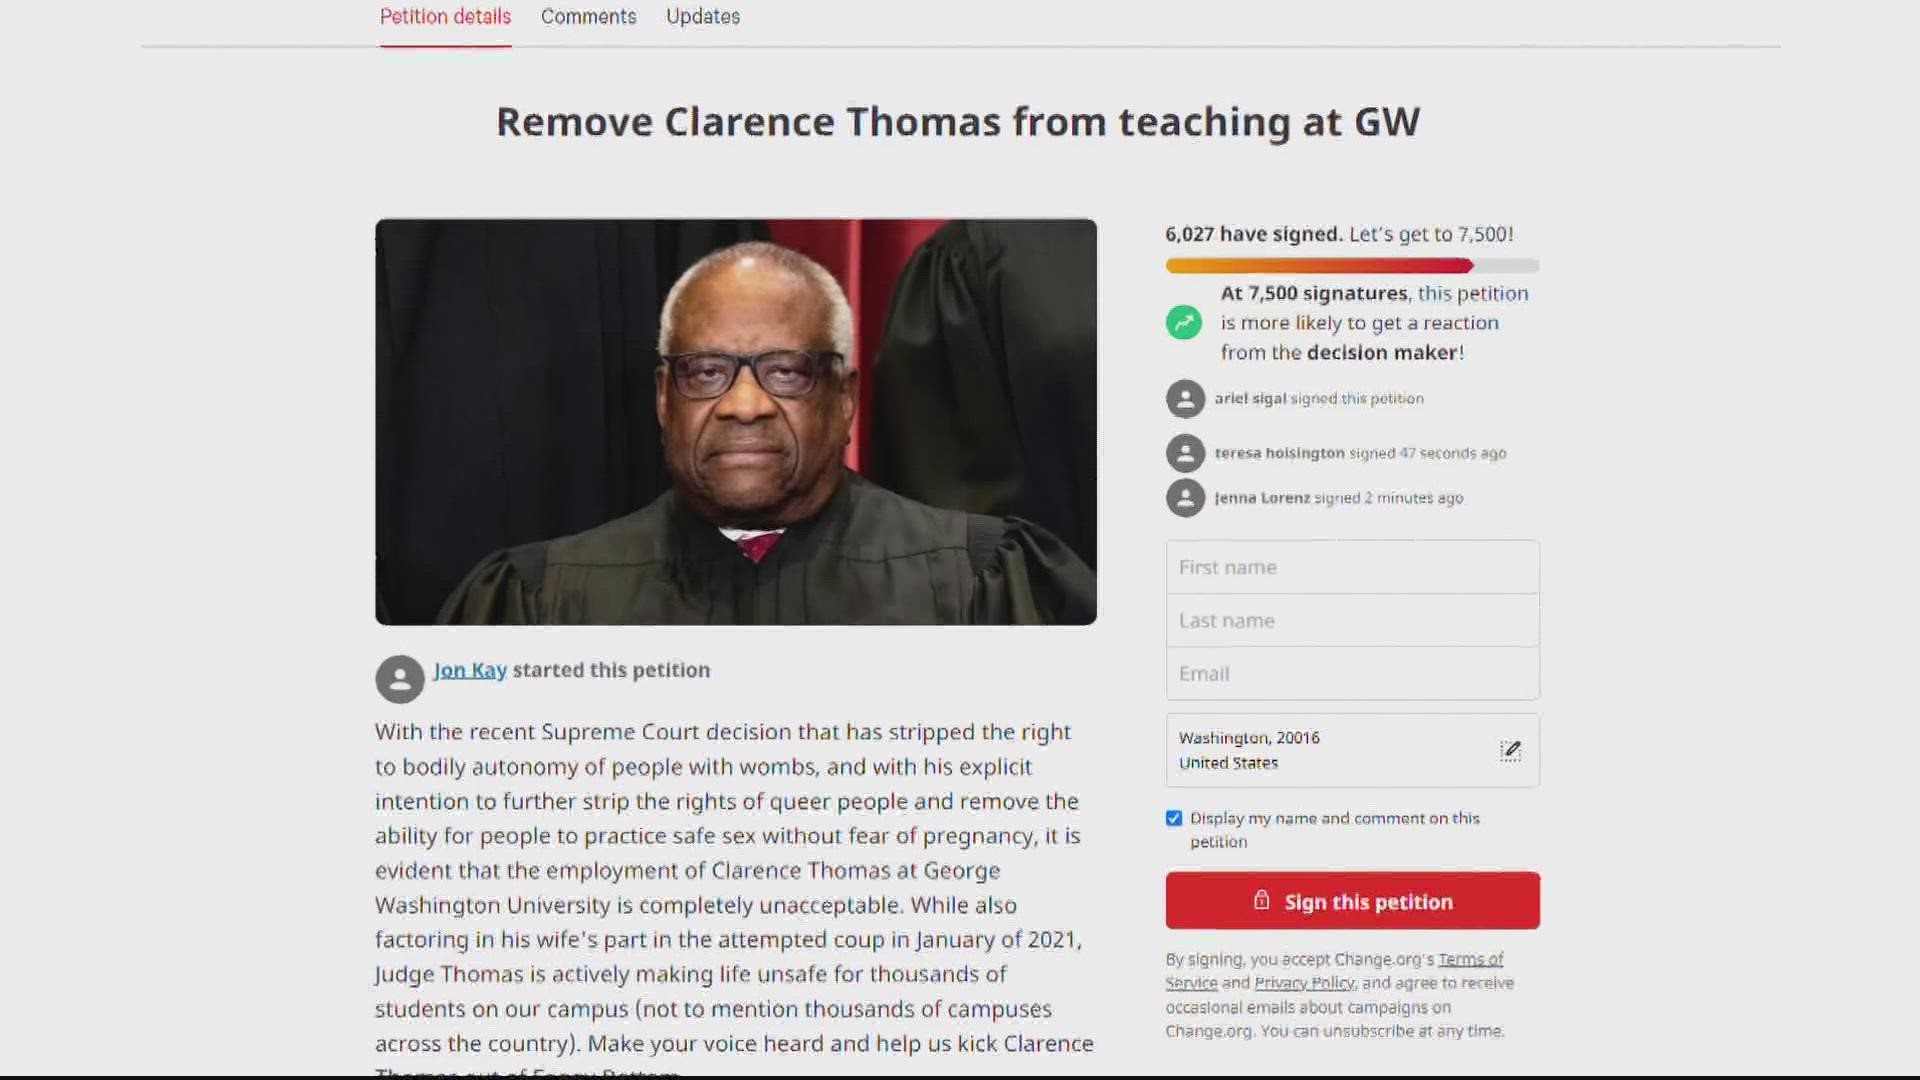 A connection between the petition and Thomas' decision not to teach has not been confirmed.